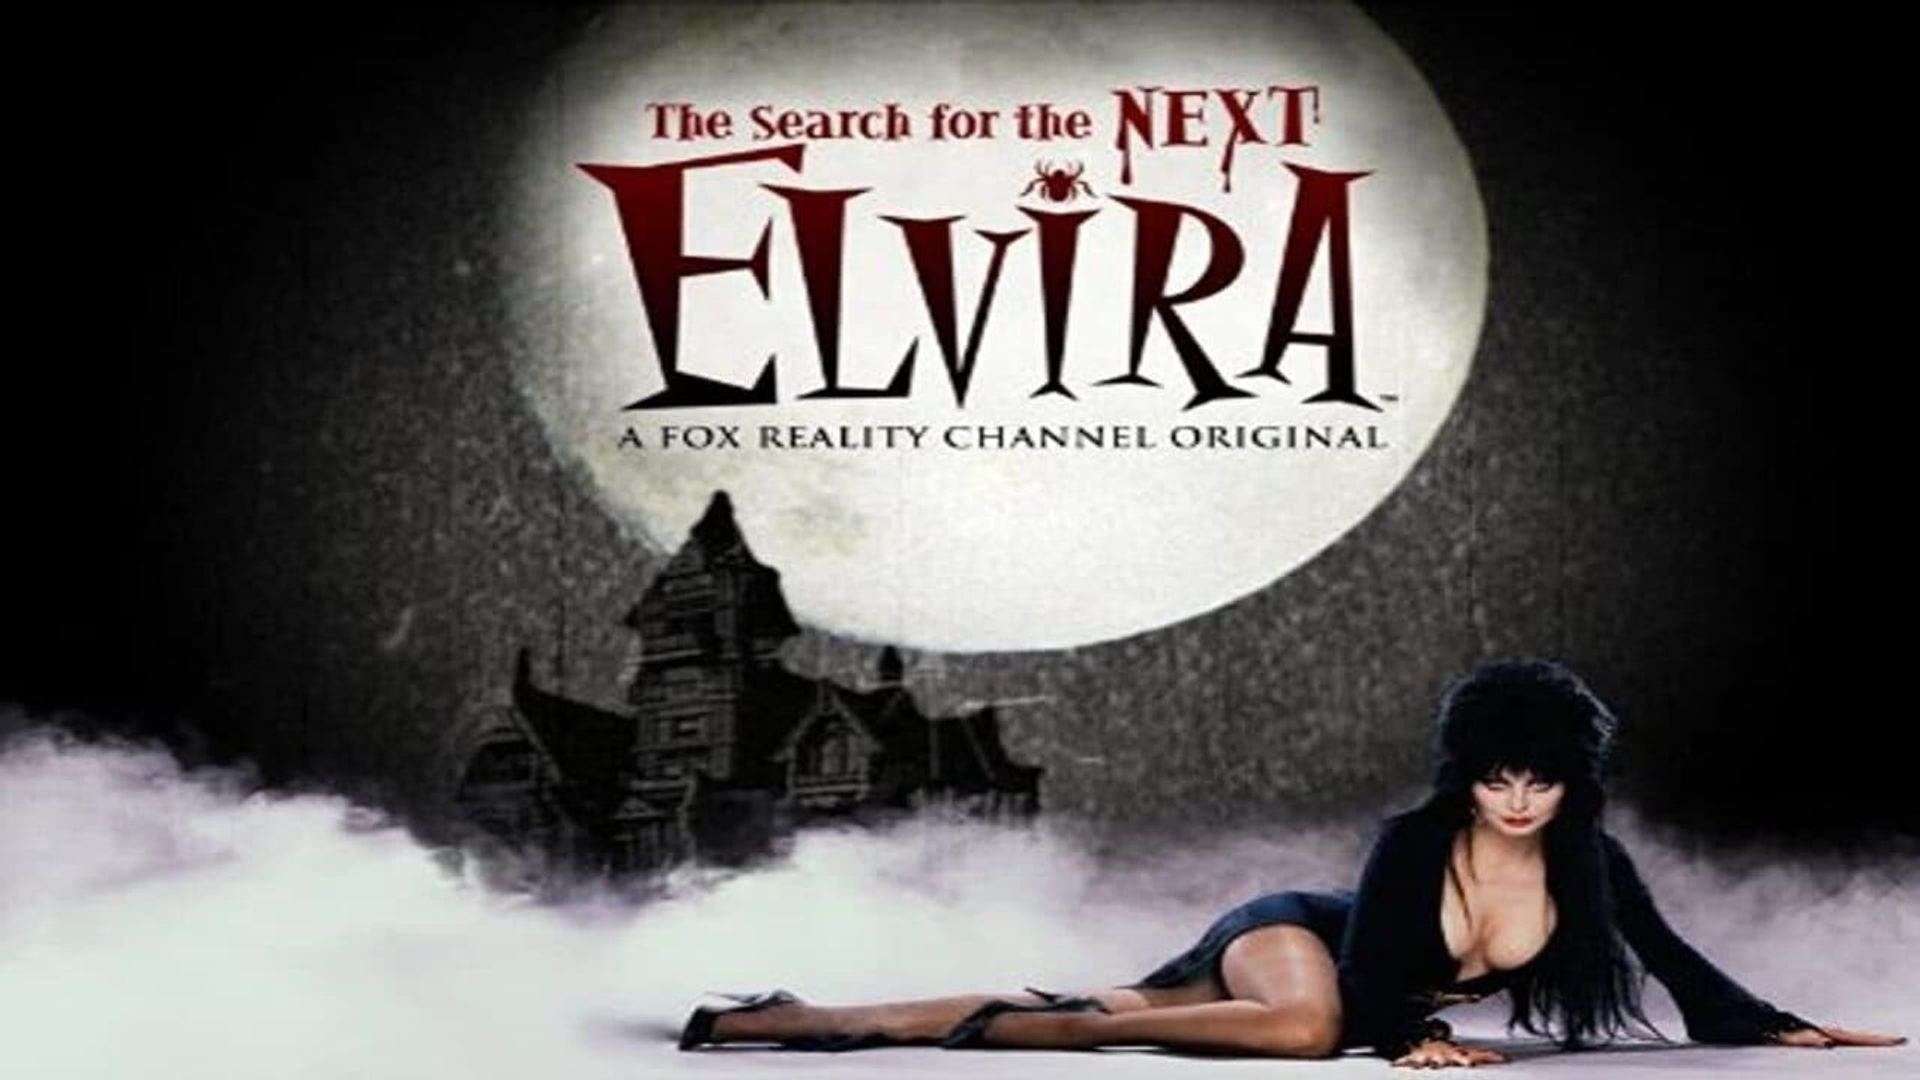 The Search for the Next Elvira background